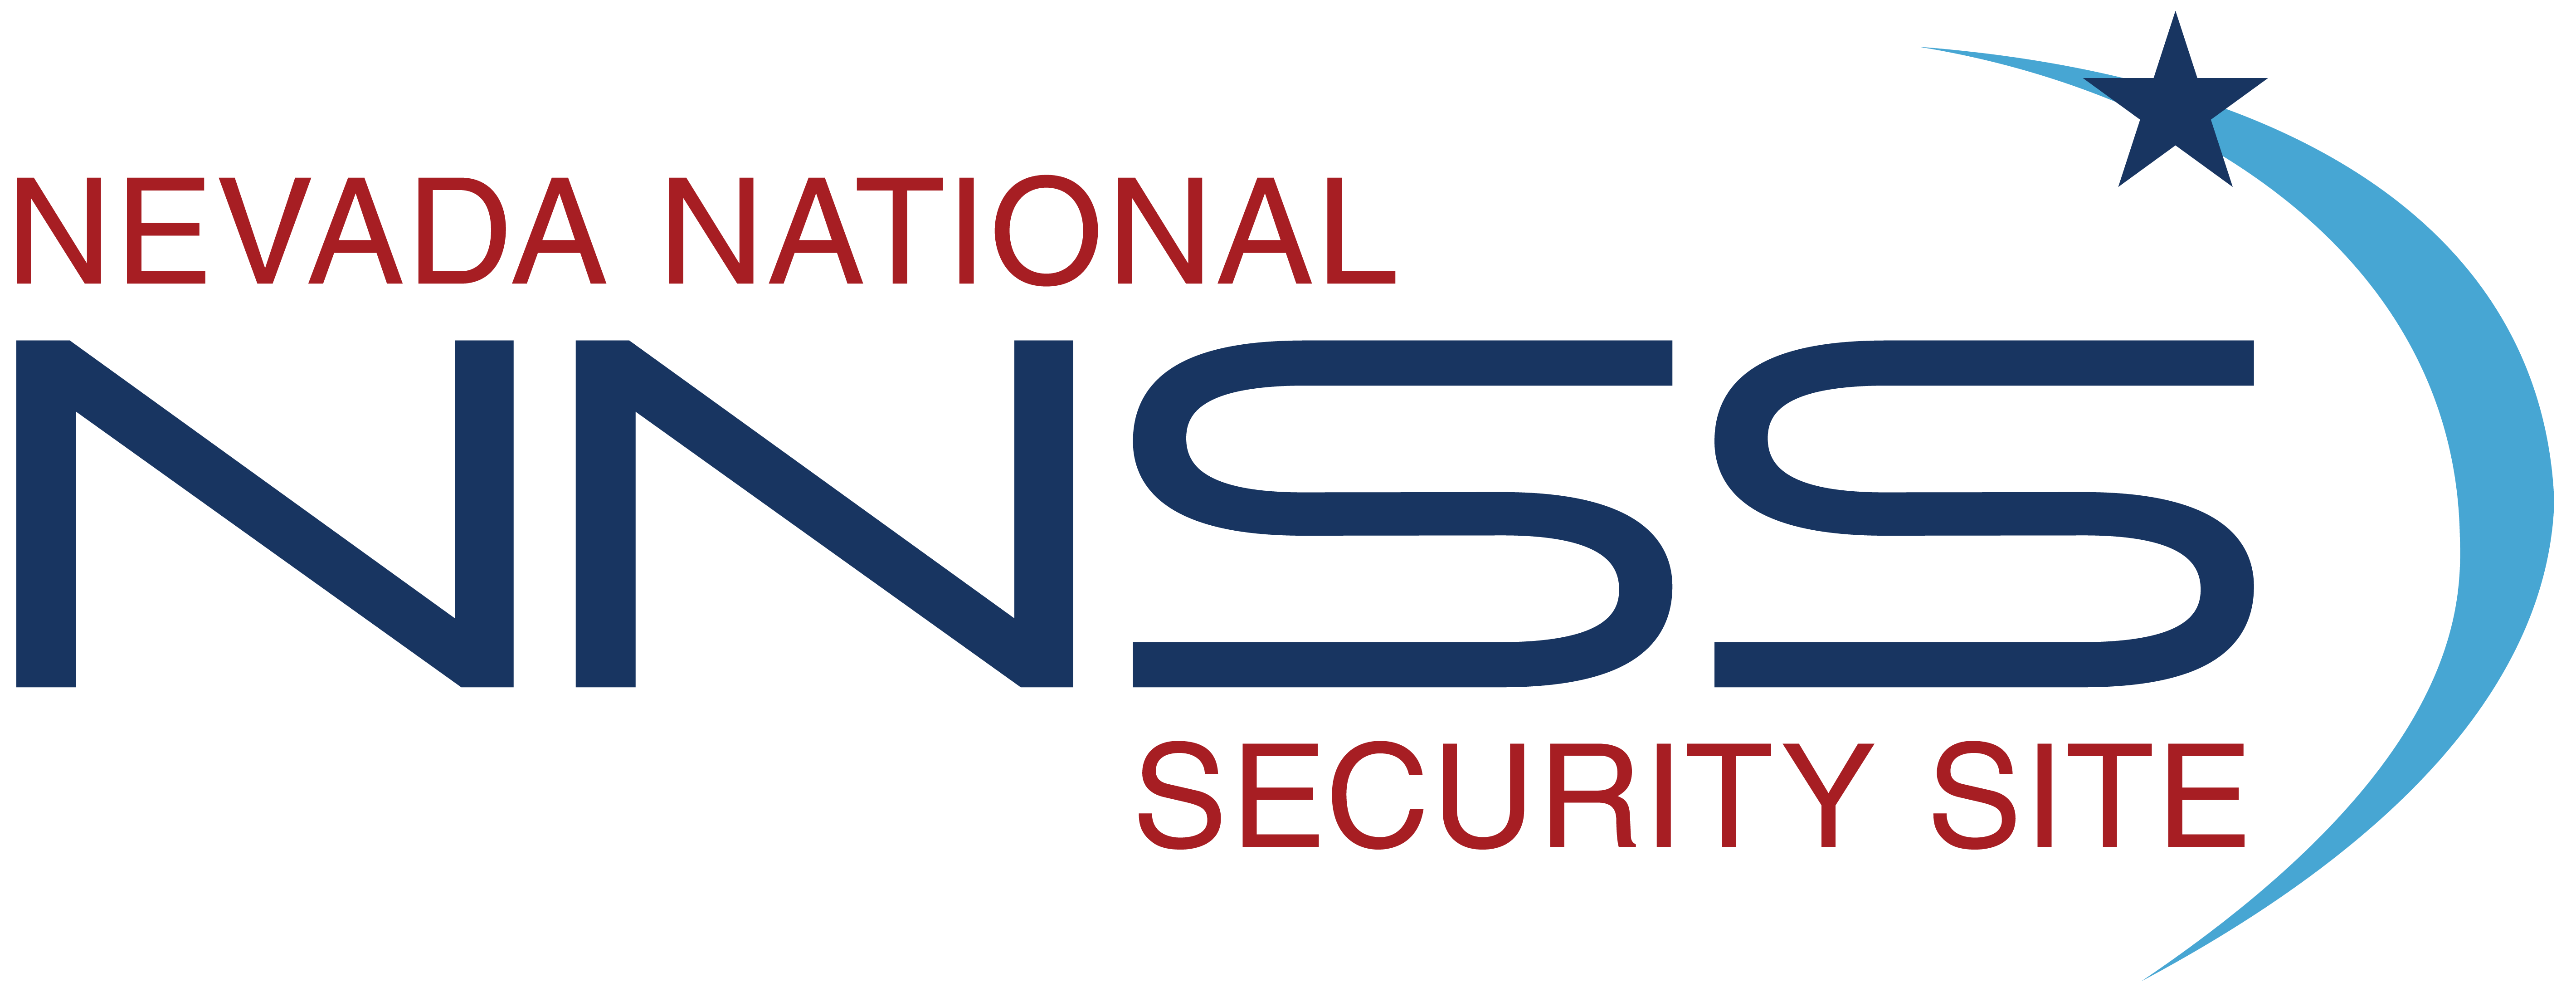 Nevada National Security Site